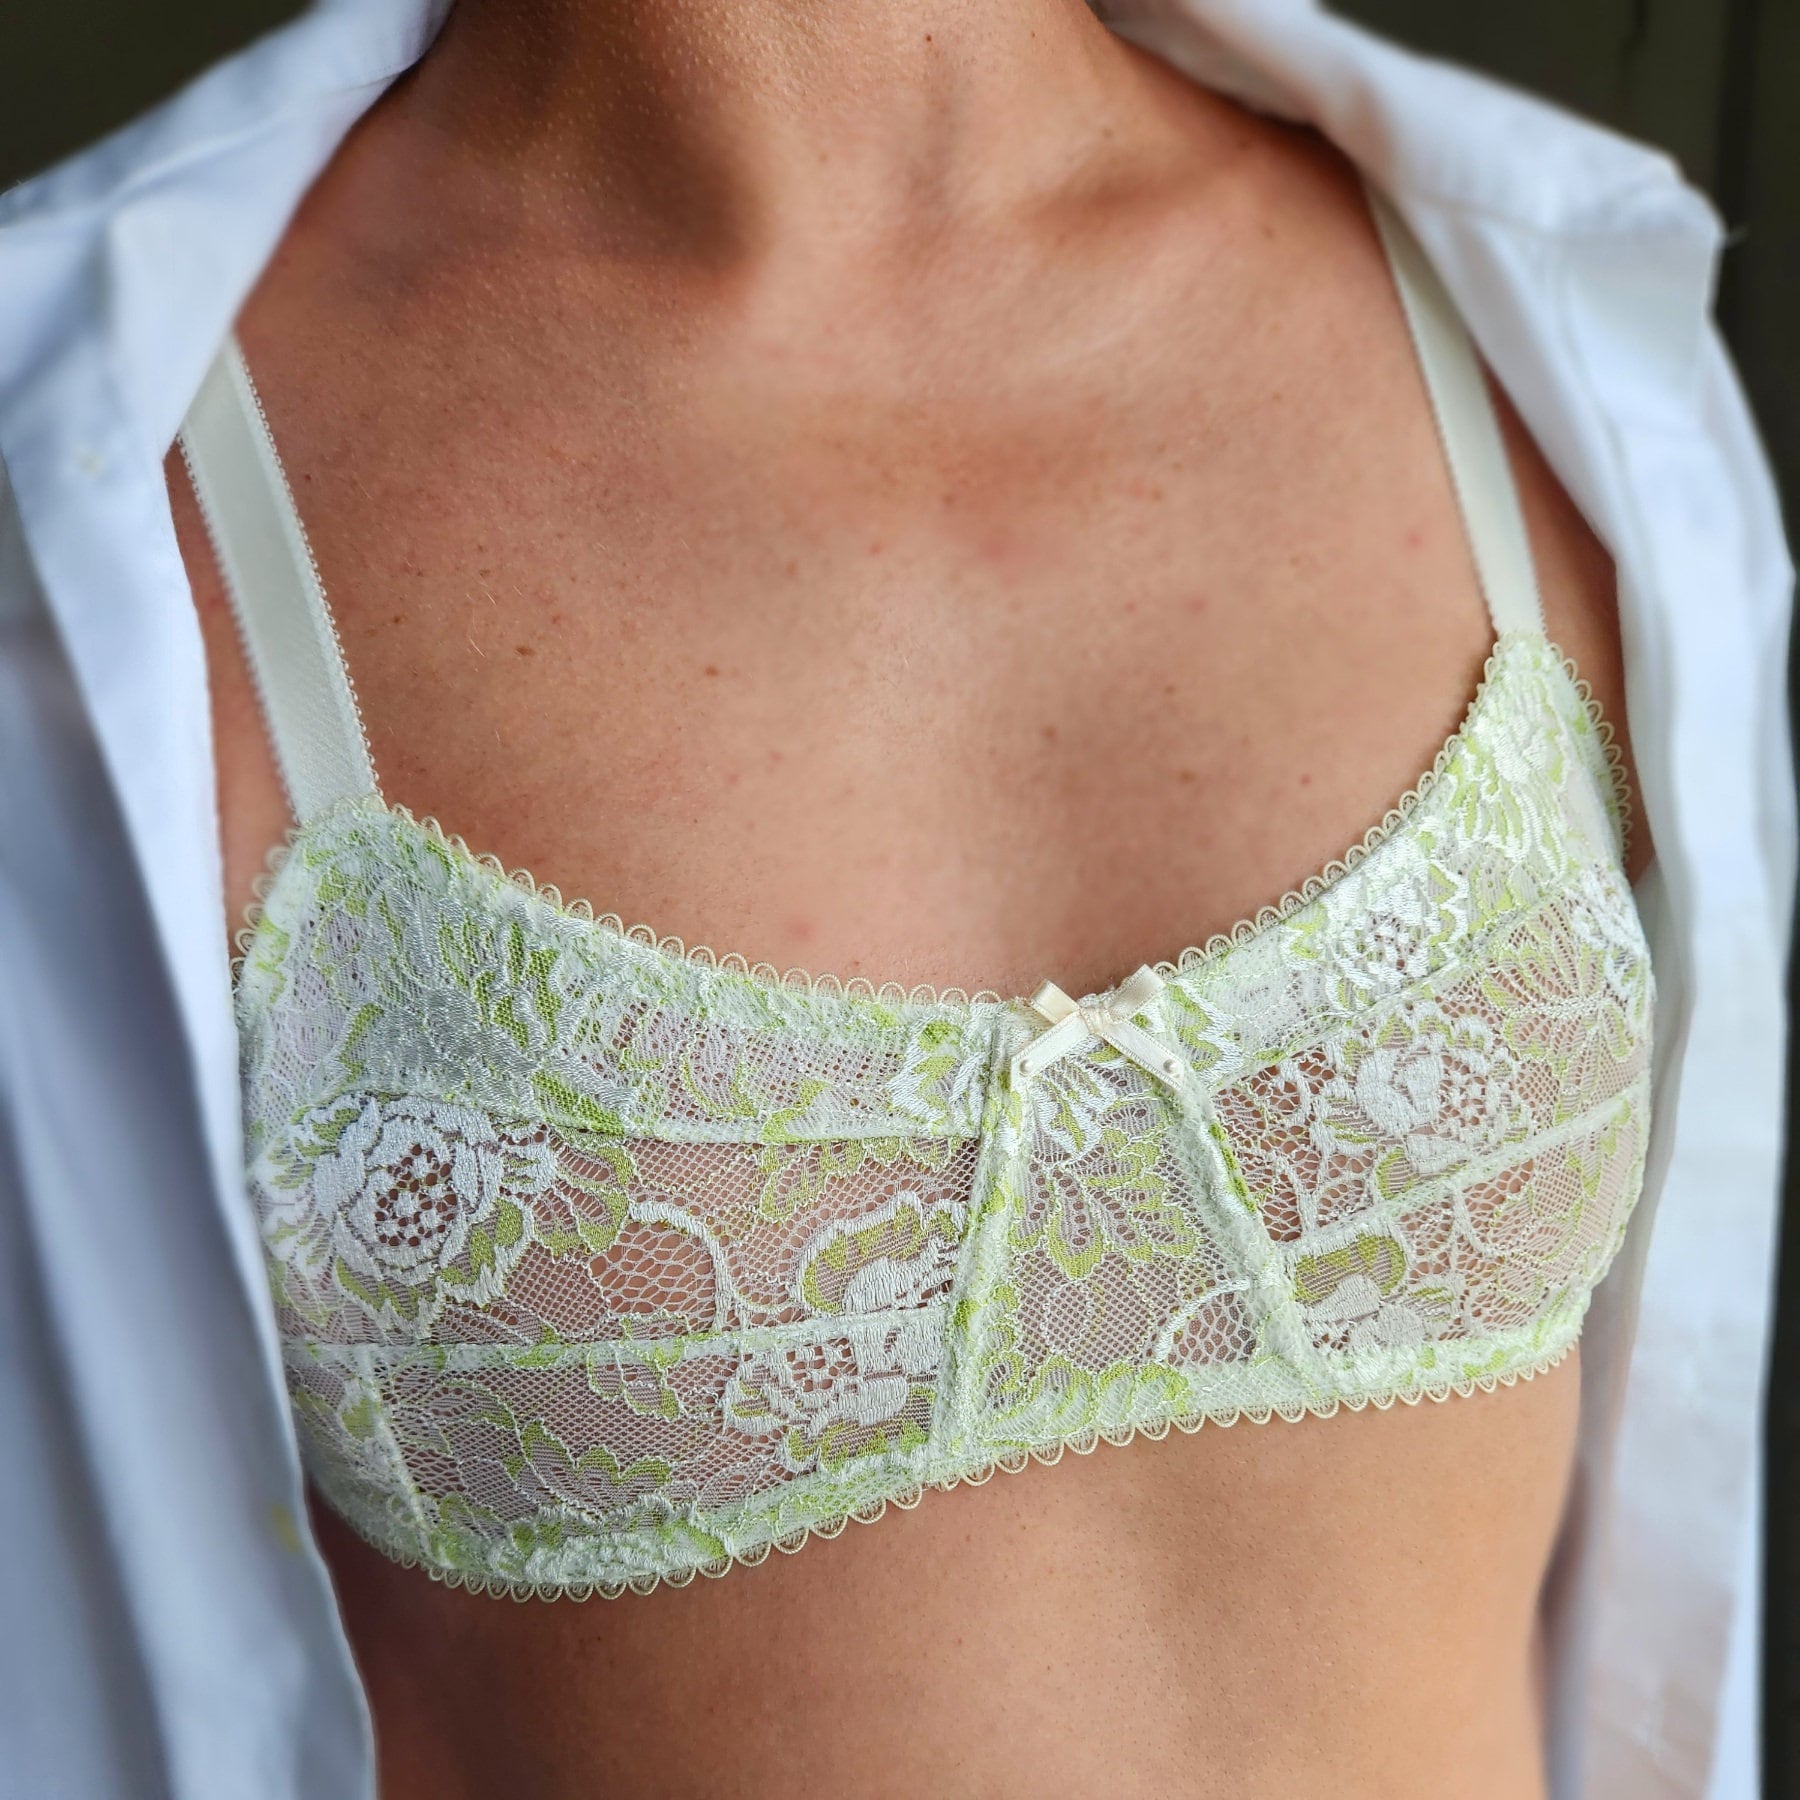 Custom Bras for Men AA Soft Cup in Extended Band Sizes. Green White Lace  Sexy Crossdressing. 